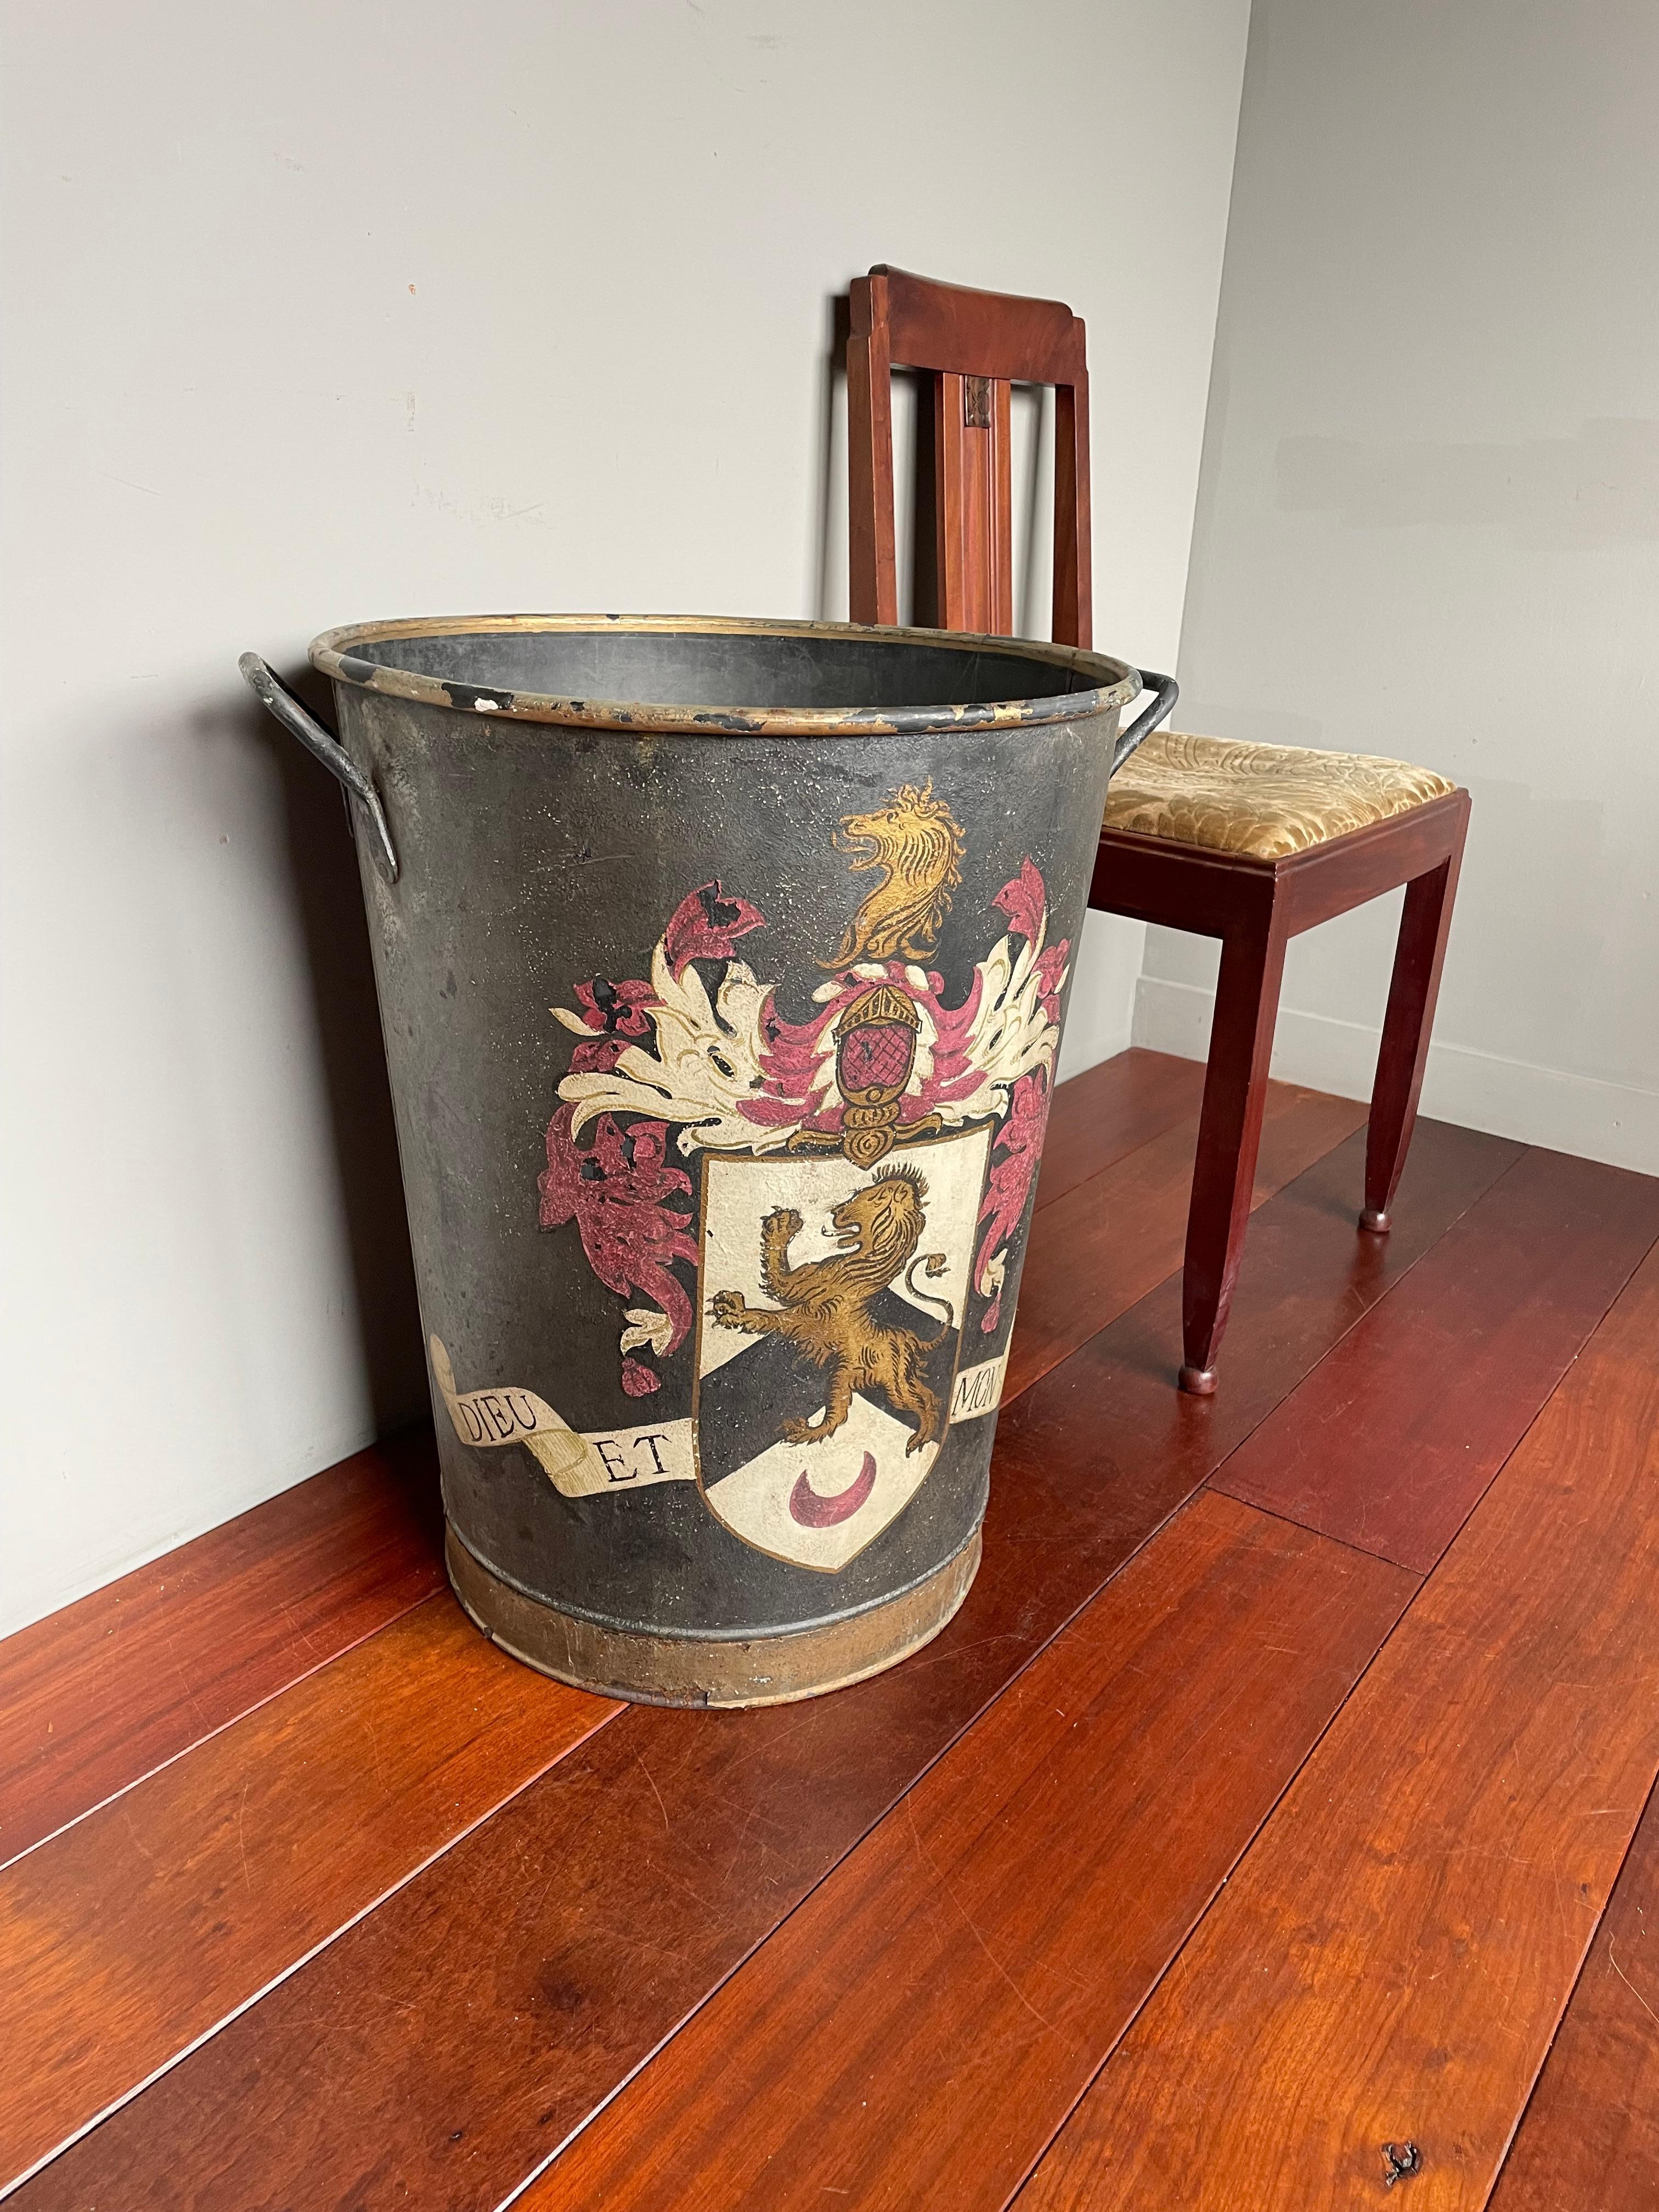 Stylish and decorative antique with handpainted crest with 'Dieu Et Mon Droit' banner.

This very large bucket is the ideal decorative antique to keep your firewood in. Over the years we have seen and sold some antique fireplace tools and buckets,